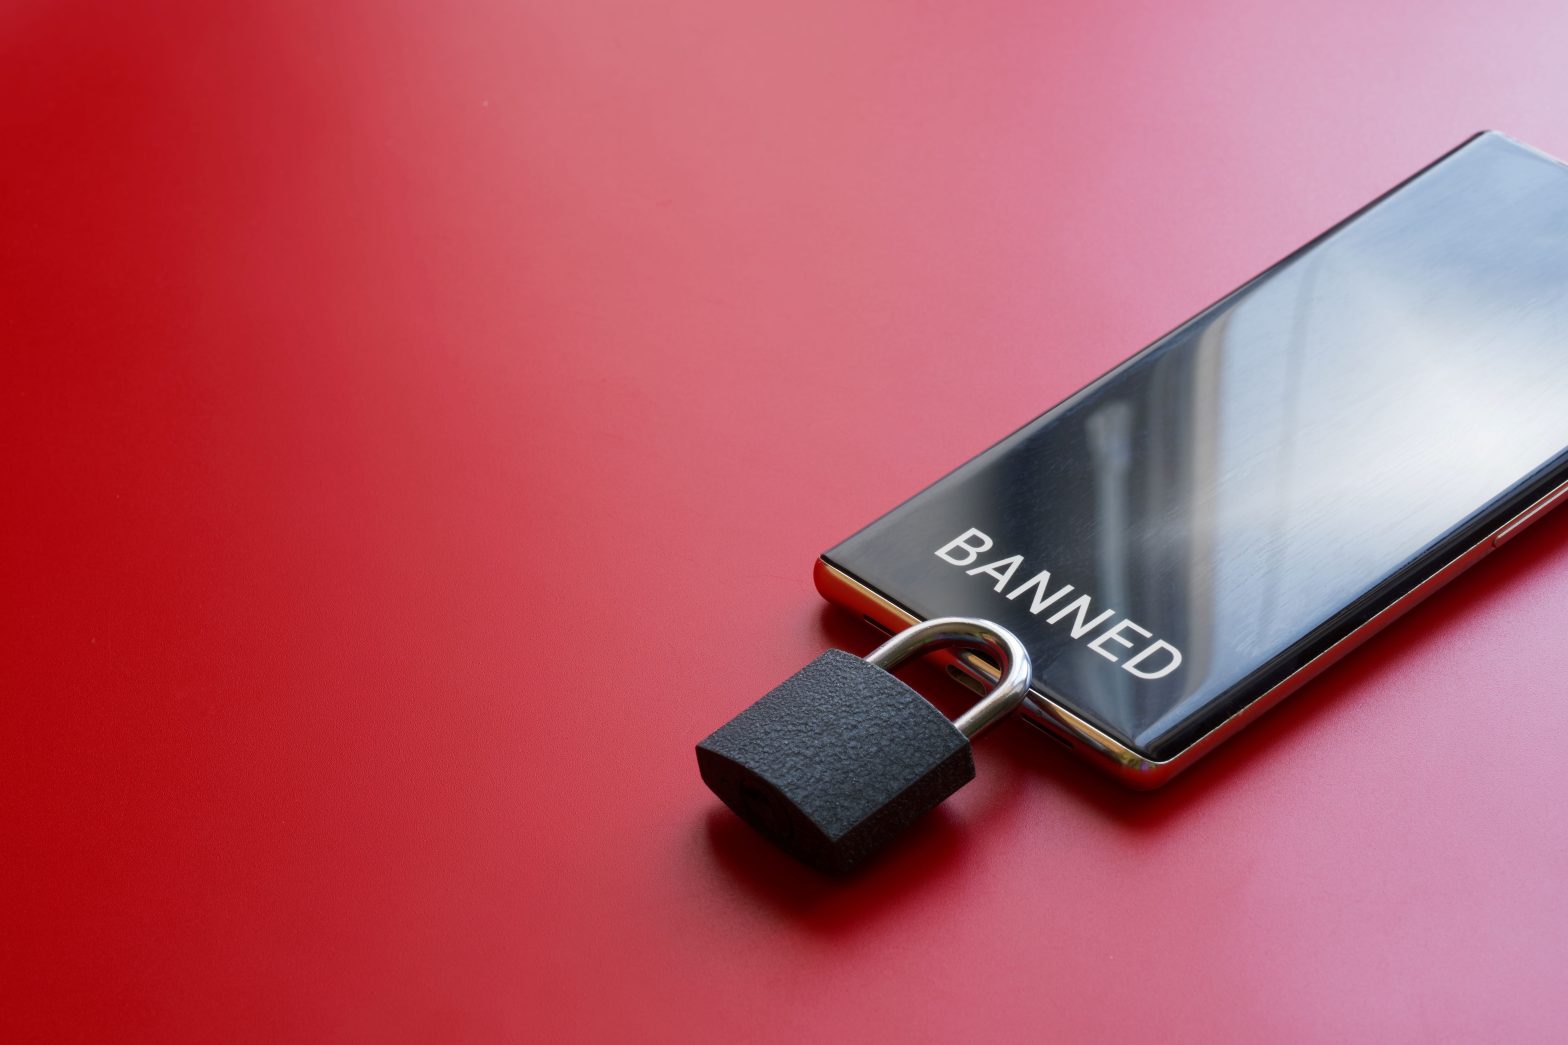 Modern mobile phone is a smartphone with the inscription "banned" and padlock on a red background. News - St. Louis City Justice Center implements phone ban for attorneys